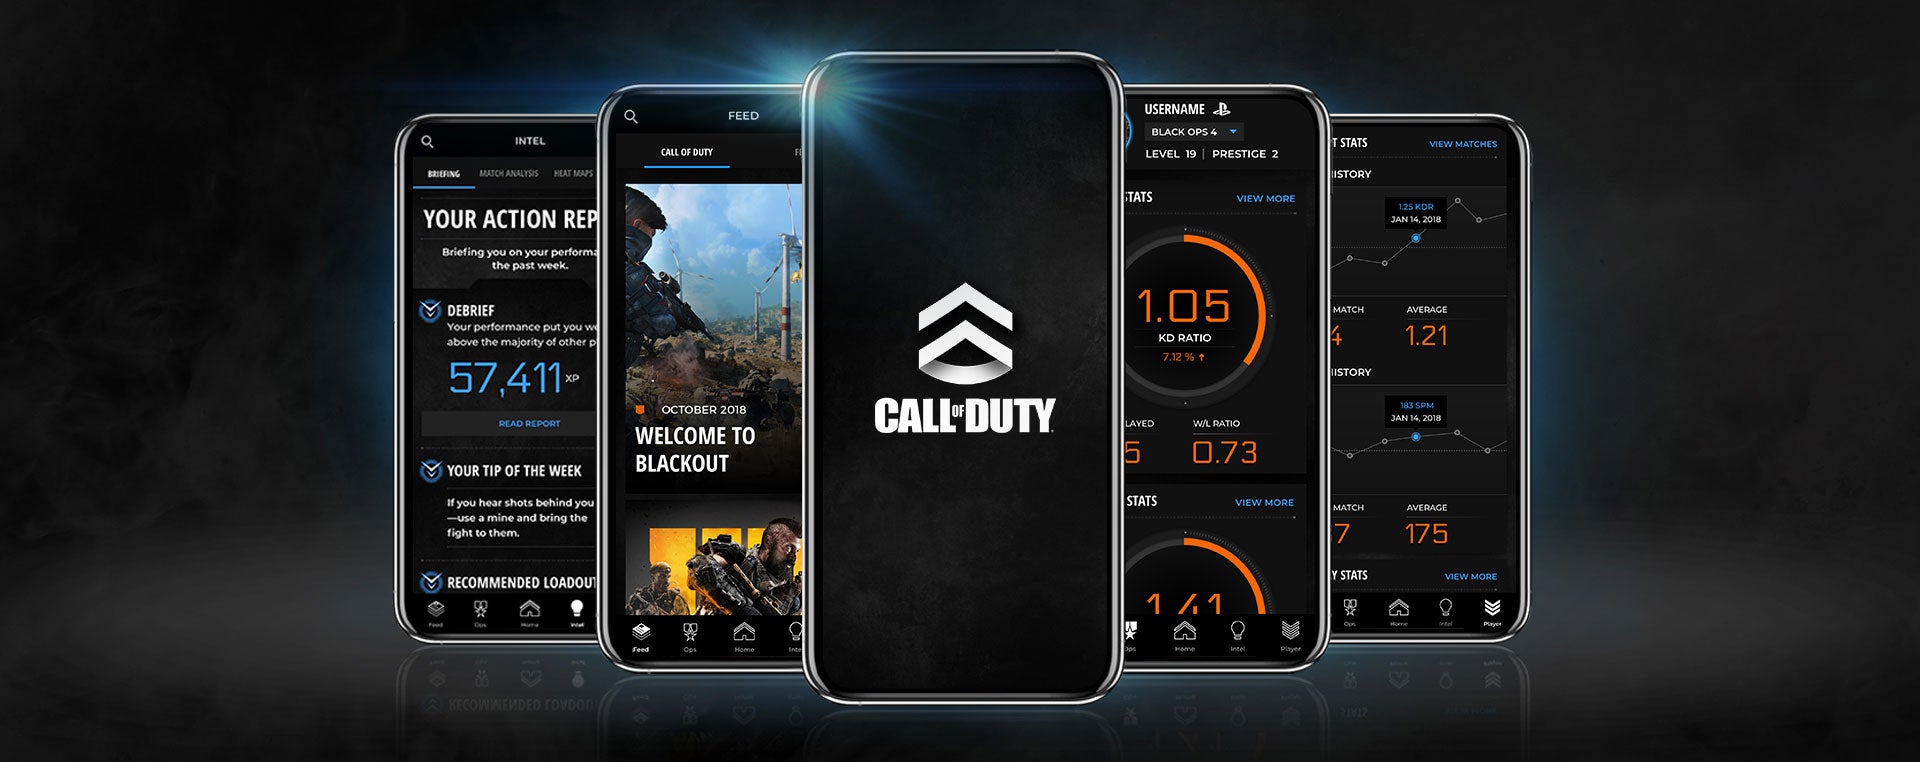 Image for Call of Duty Companion App is out now, gets you 500 COD Points for downloading